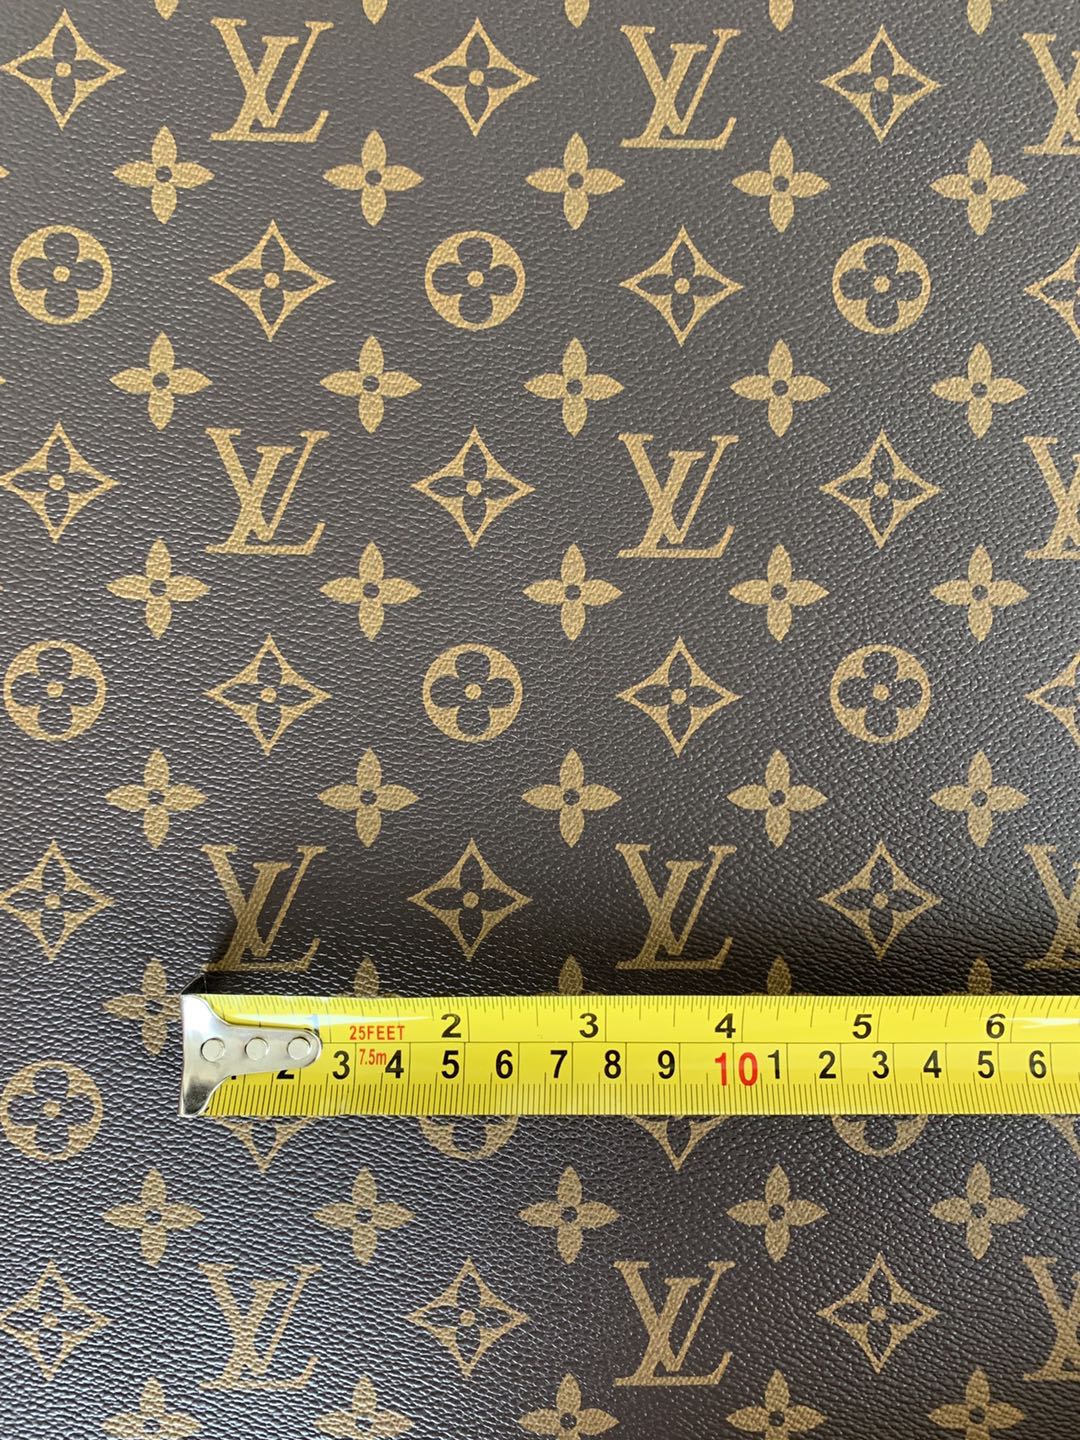 Classic LV vinyl crafting leather fabric For Handmade Shoes